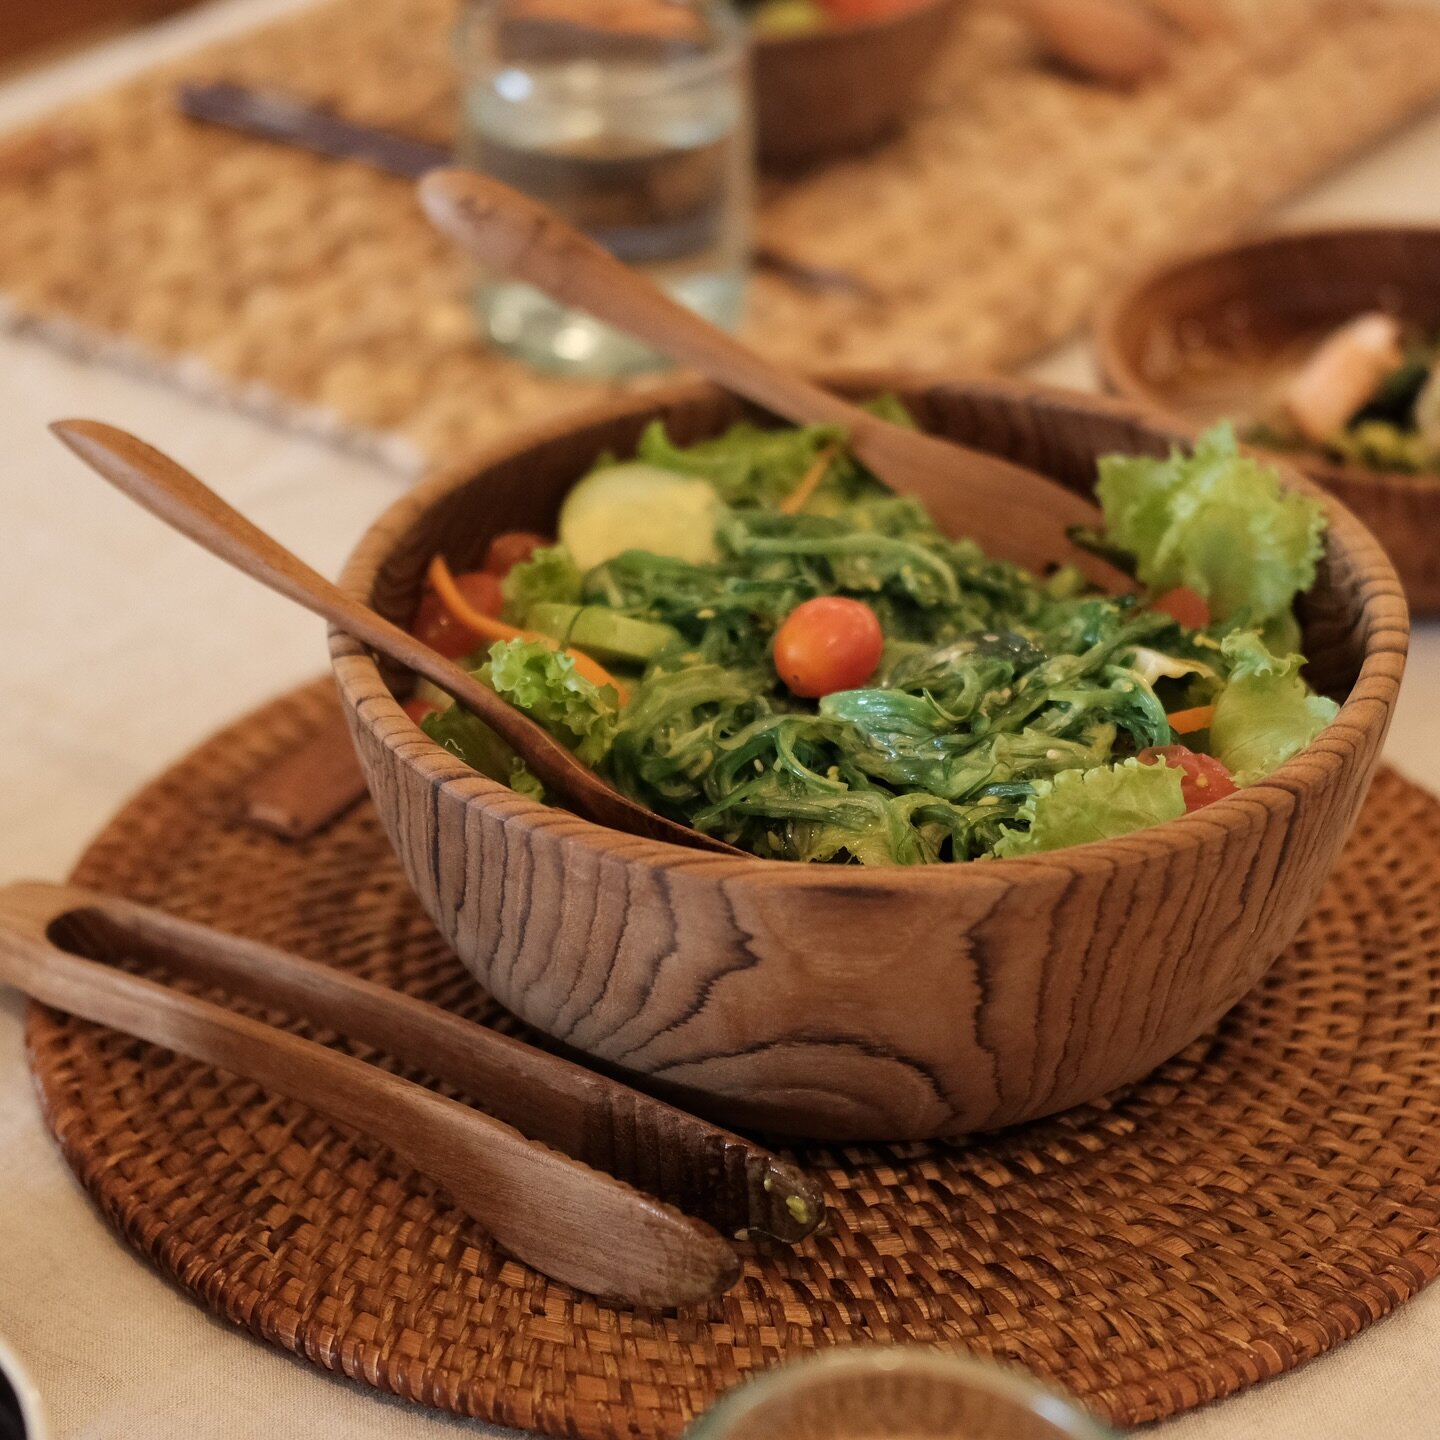 Nourishing meals served on handmade wooden bowls. It's the simple happiness that make each day brighter! Shop our high quality wooden teak bowls in store or online via Tokopedia.

🥗 Wakame Salad by @nikaskitchen.id